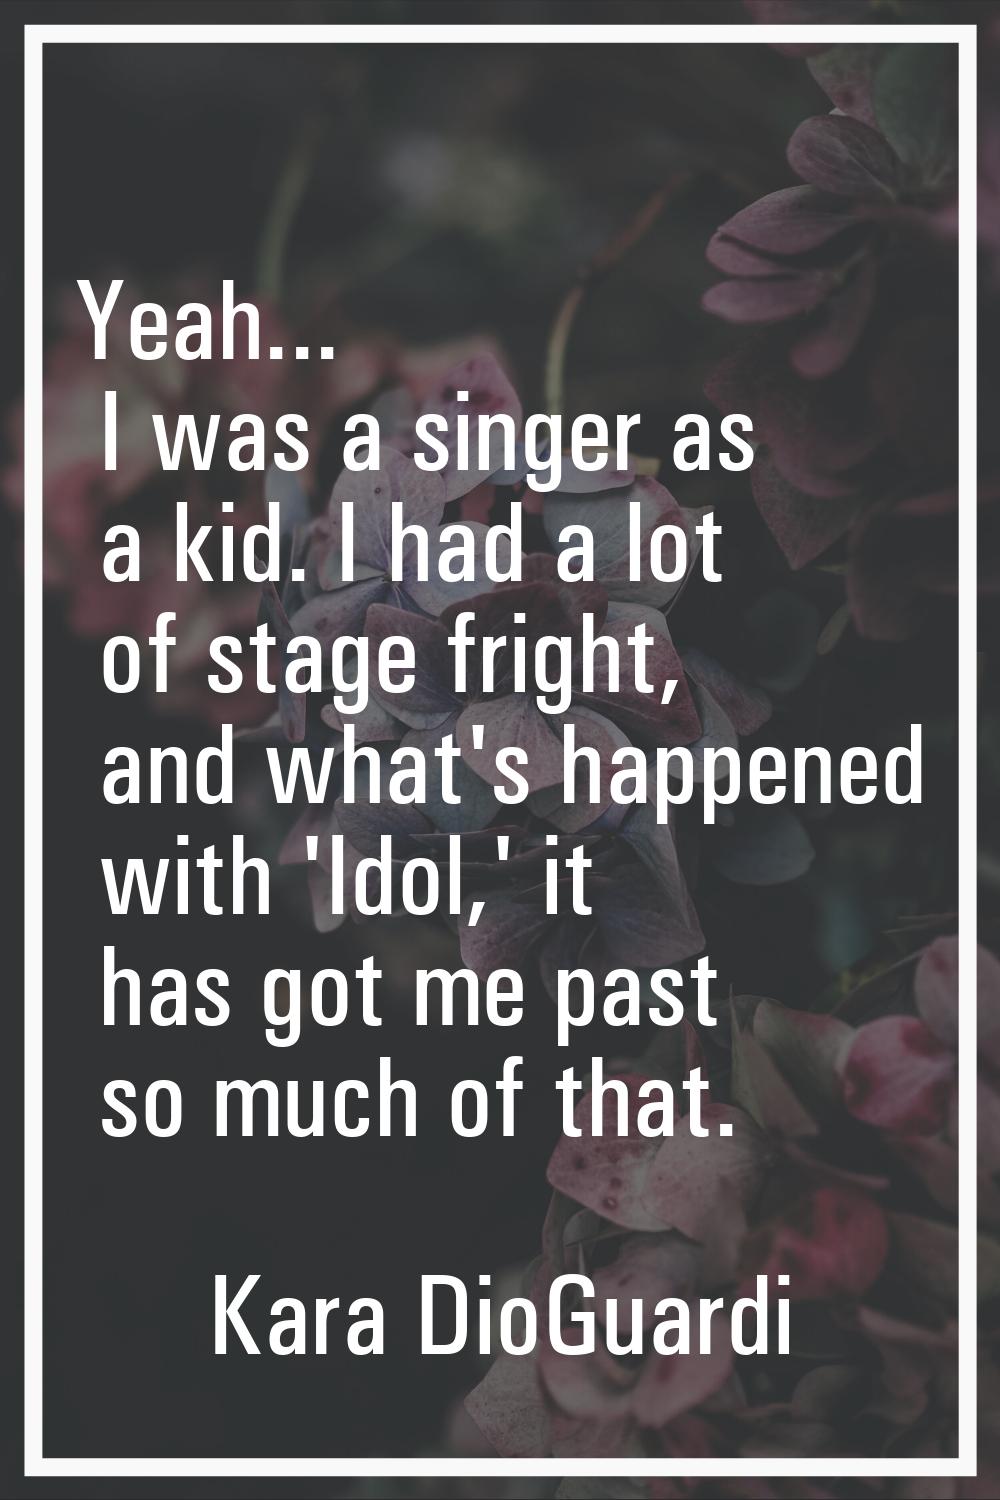 Yeah... I was a singer as a kid. I had a lot of stage fright, and what's happened with 'Idol,' it h